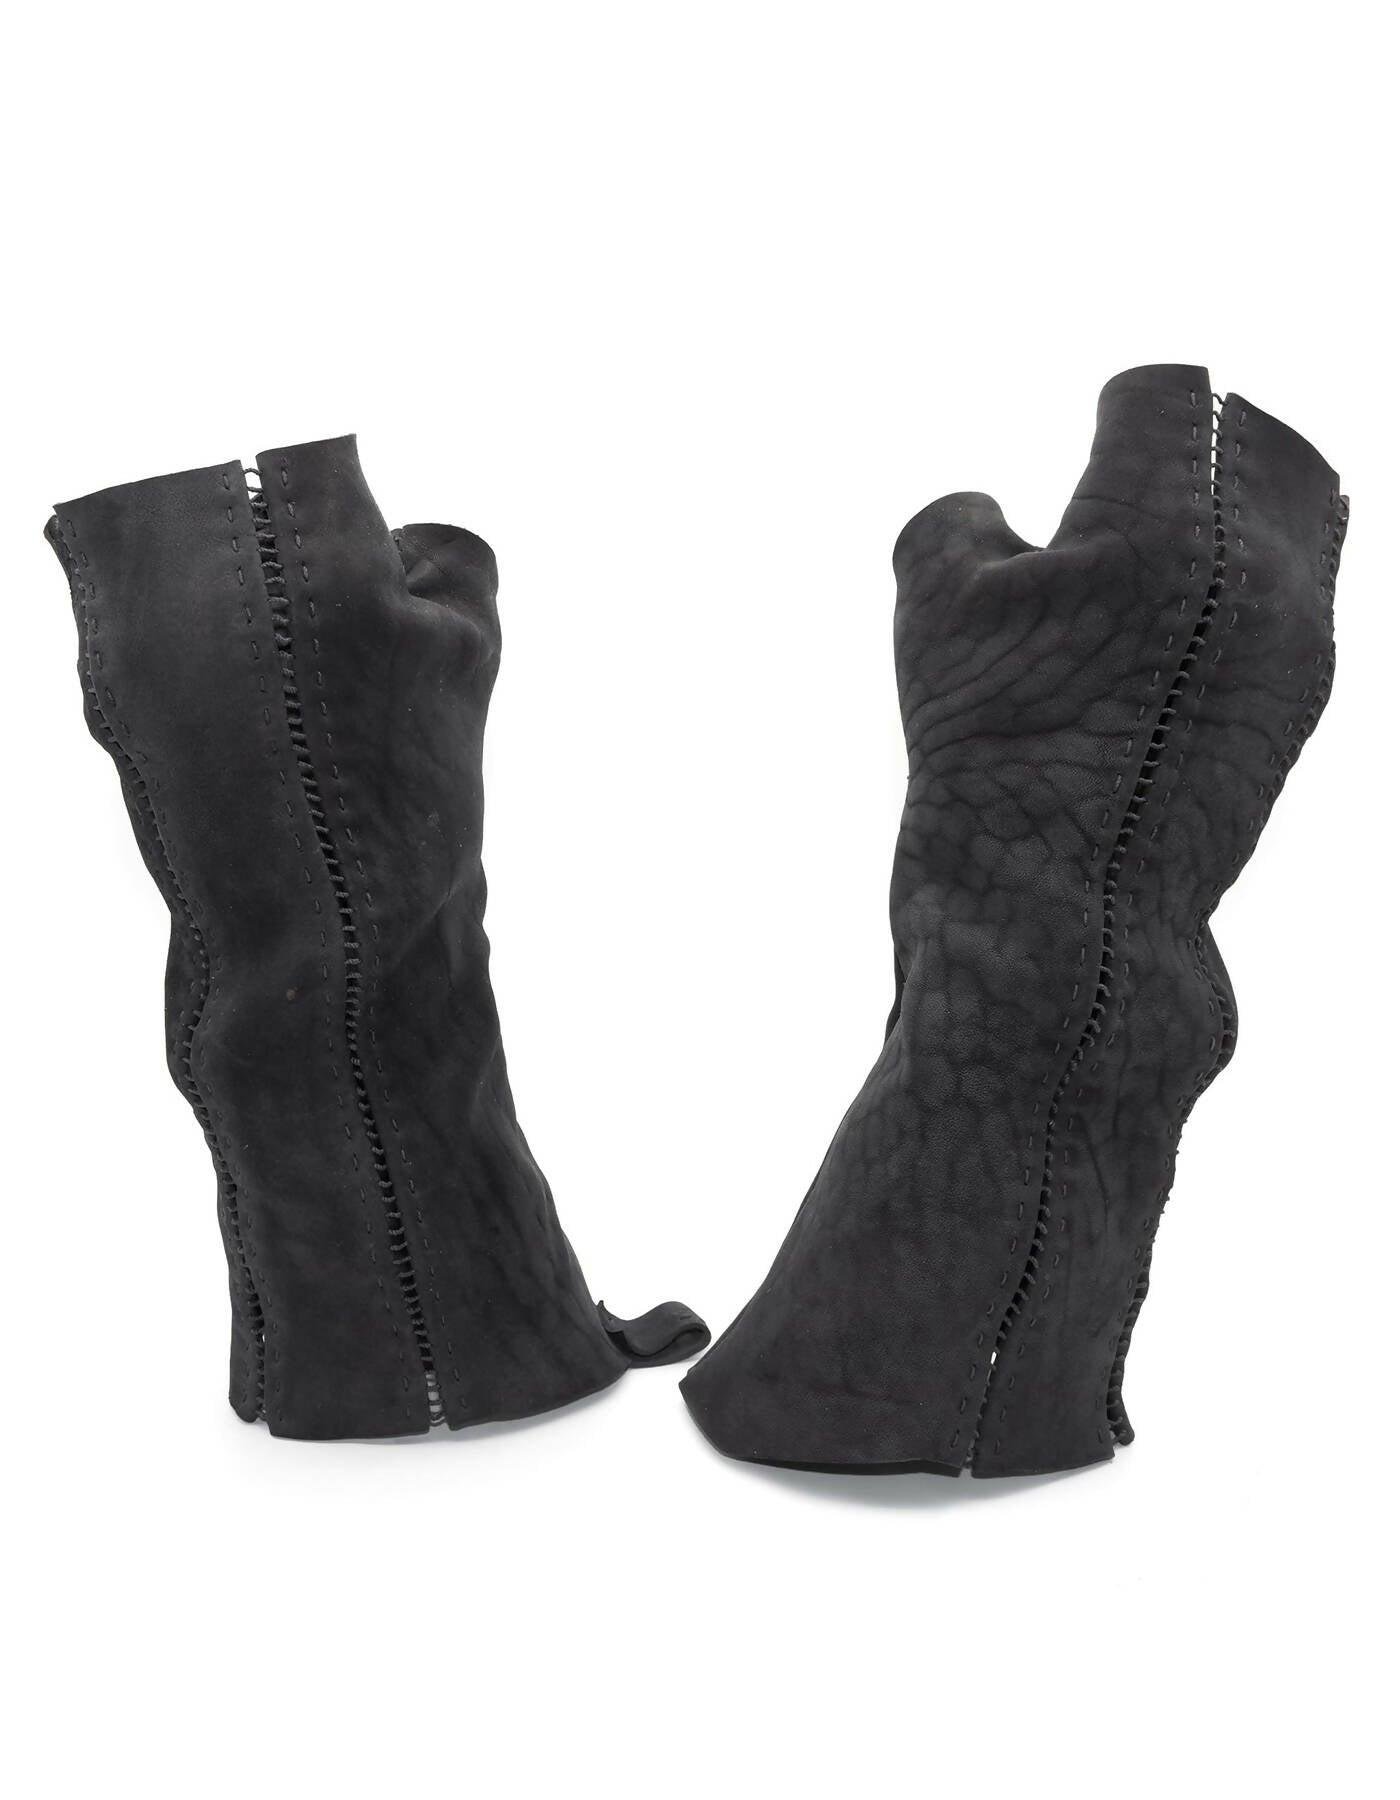 open seam long leather gloves by ATELIER SKN